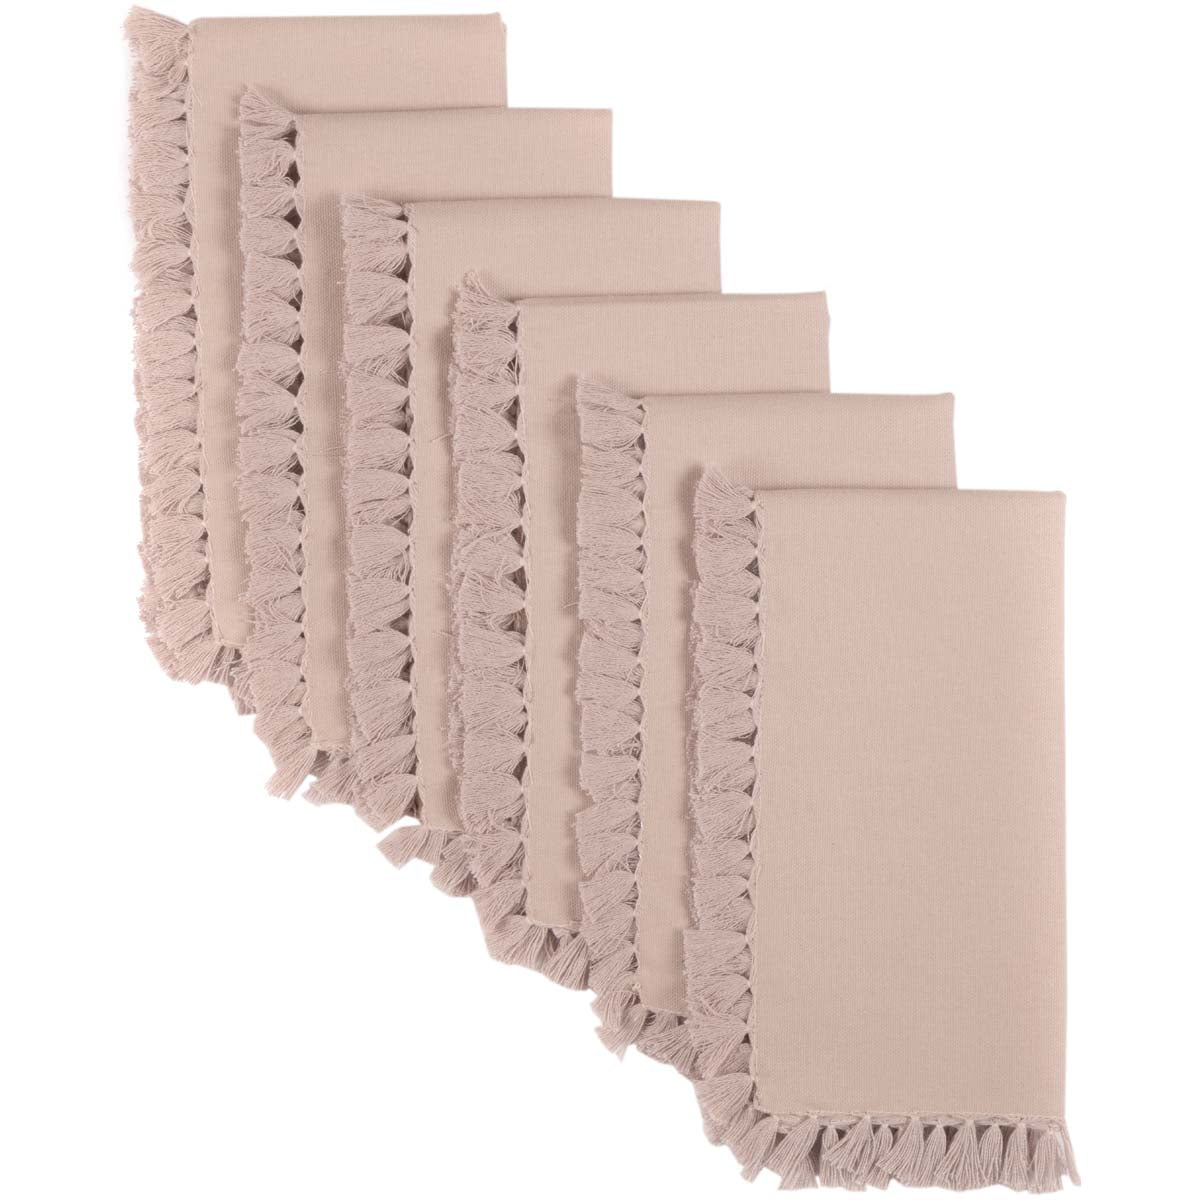 Cassidy Taupe Napkin Set of 6 18x18 VHC Brands